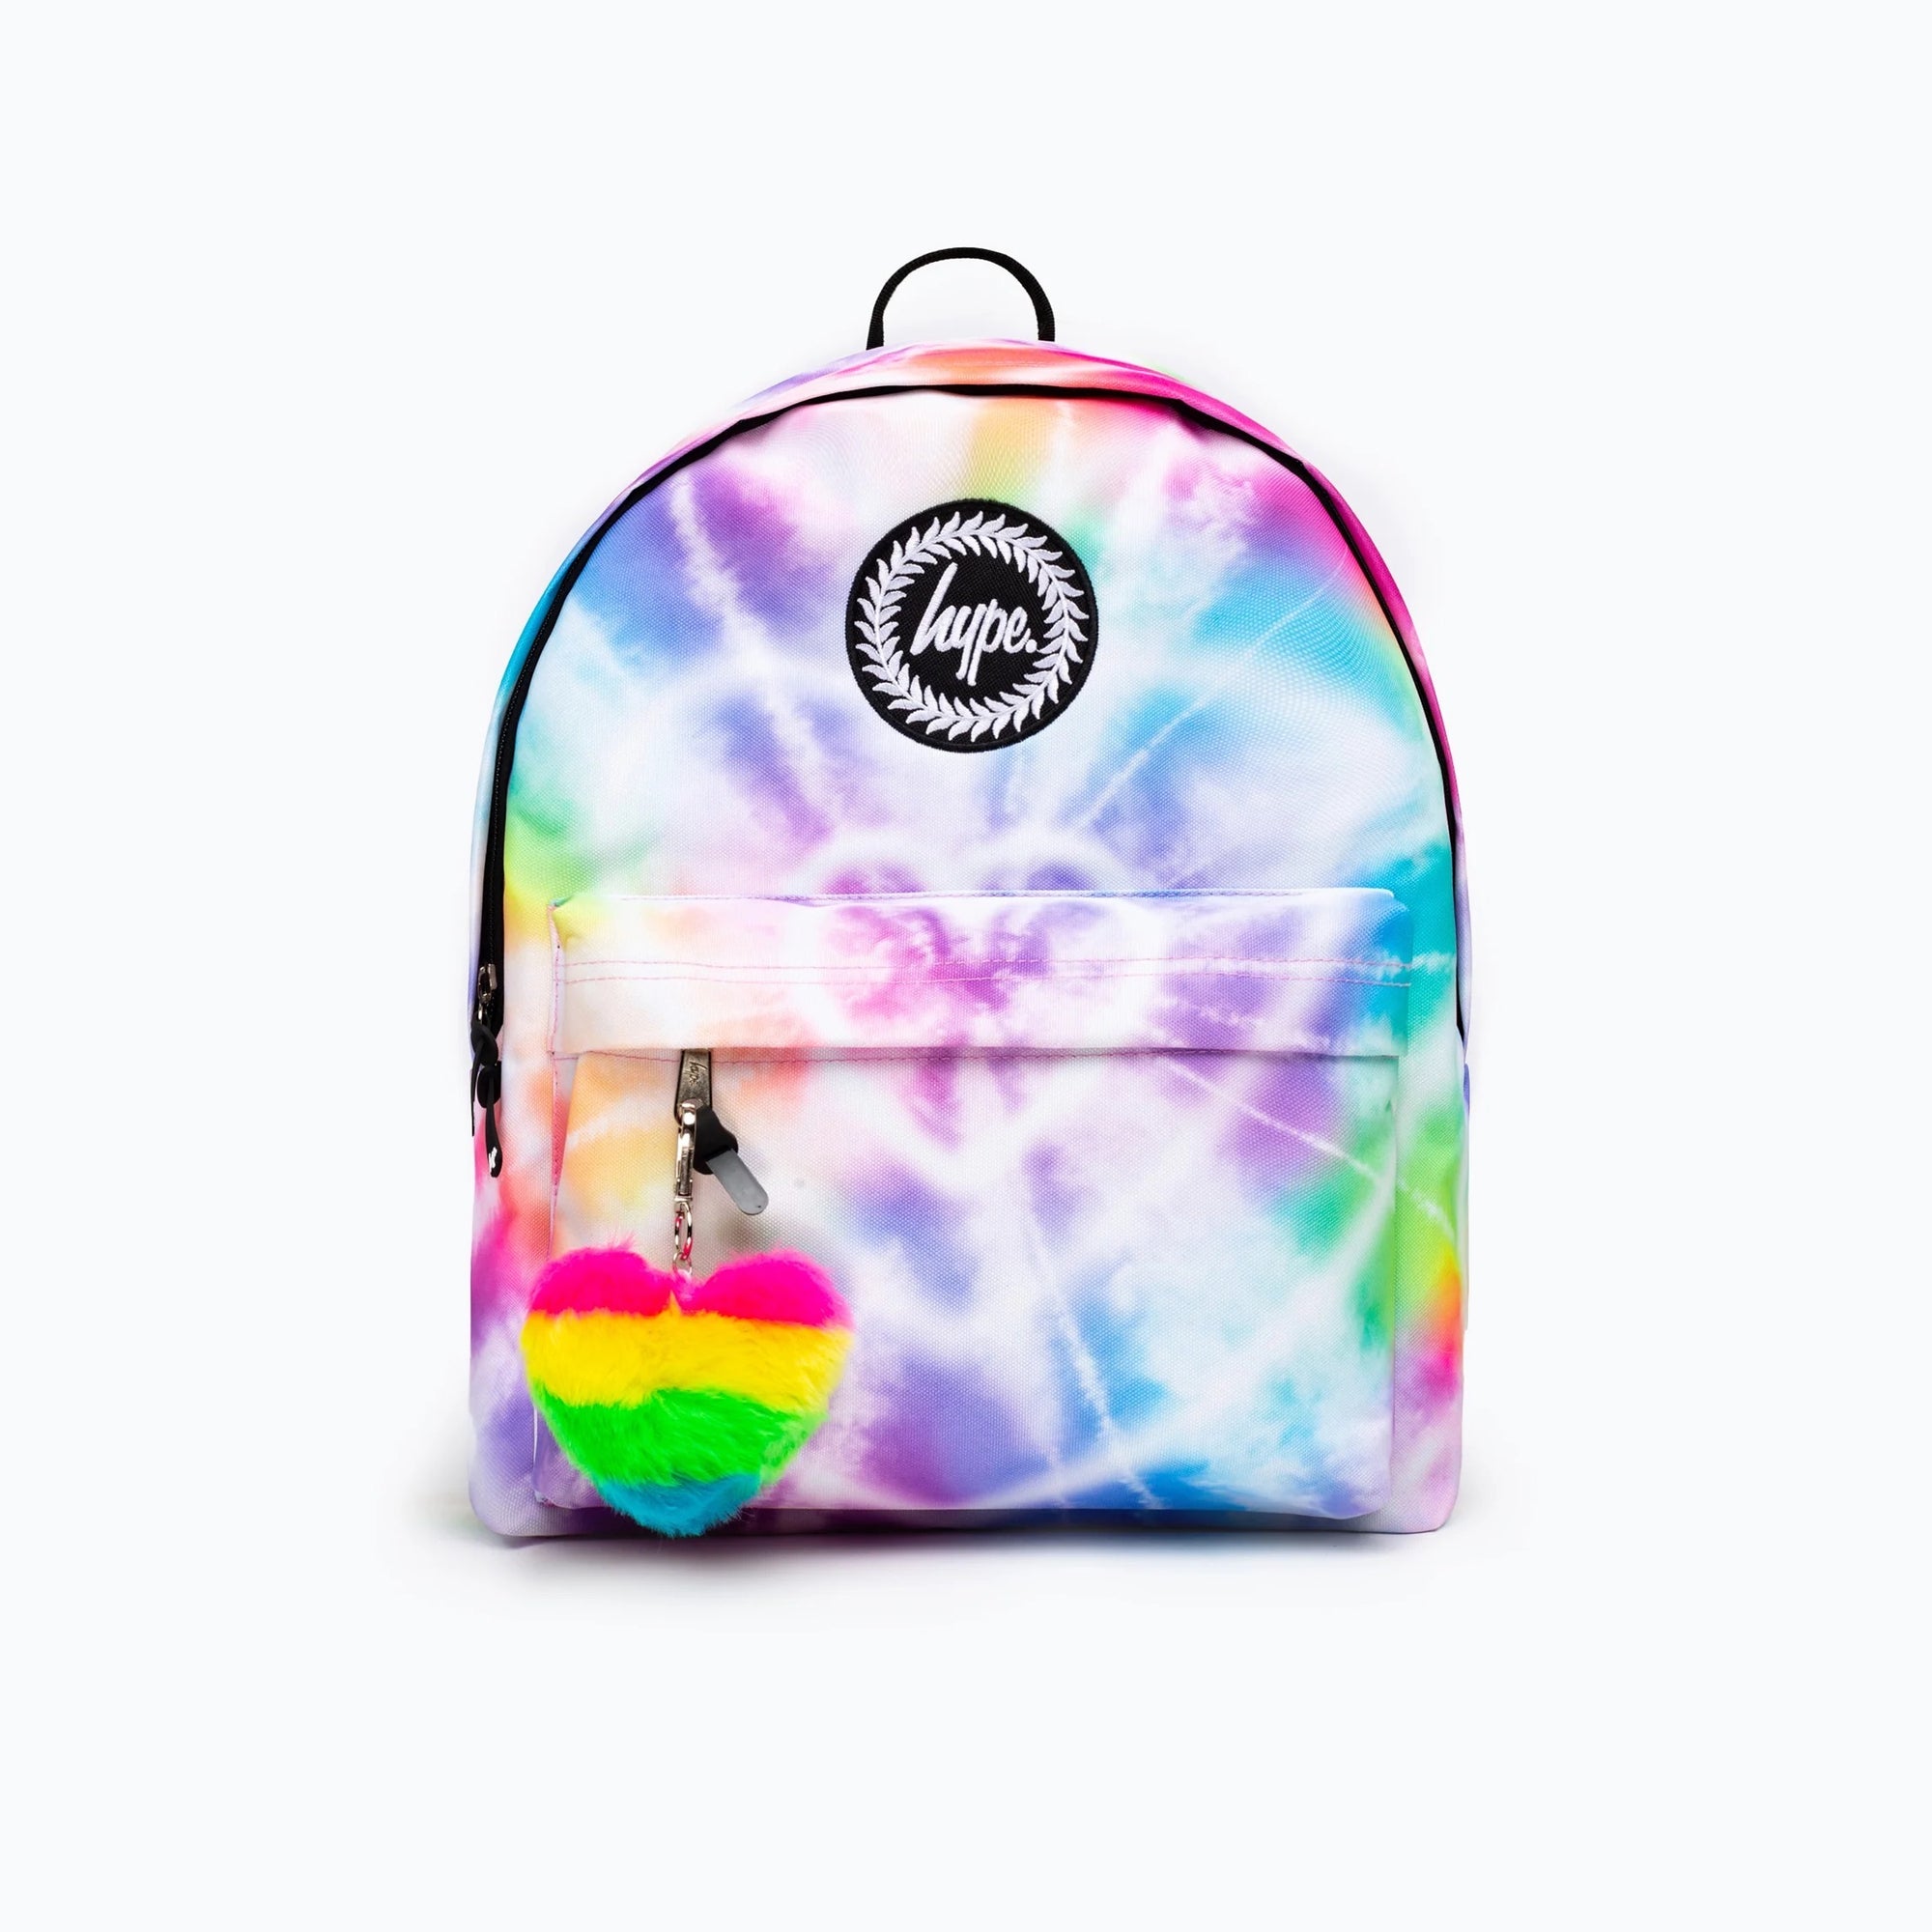 Hype Rainbow Heart Tie Dye Backpack Xucb-016 Accessories ONE SIZE / Multi